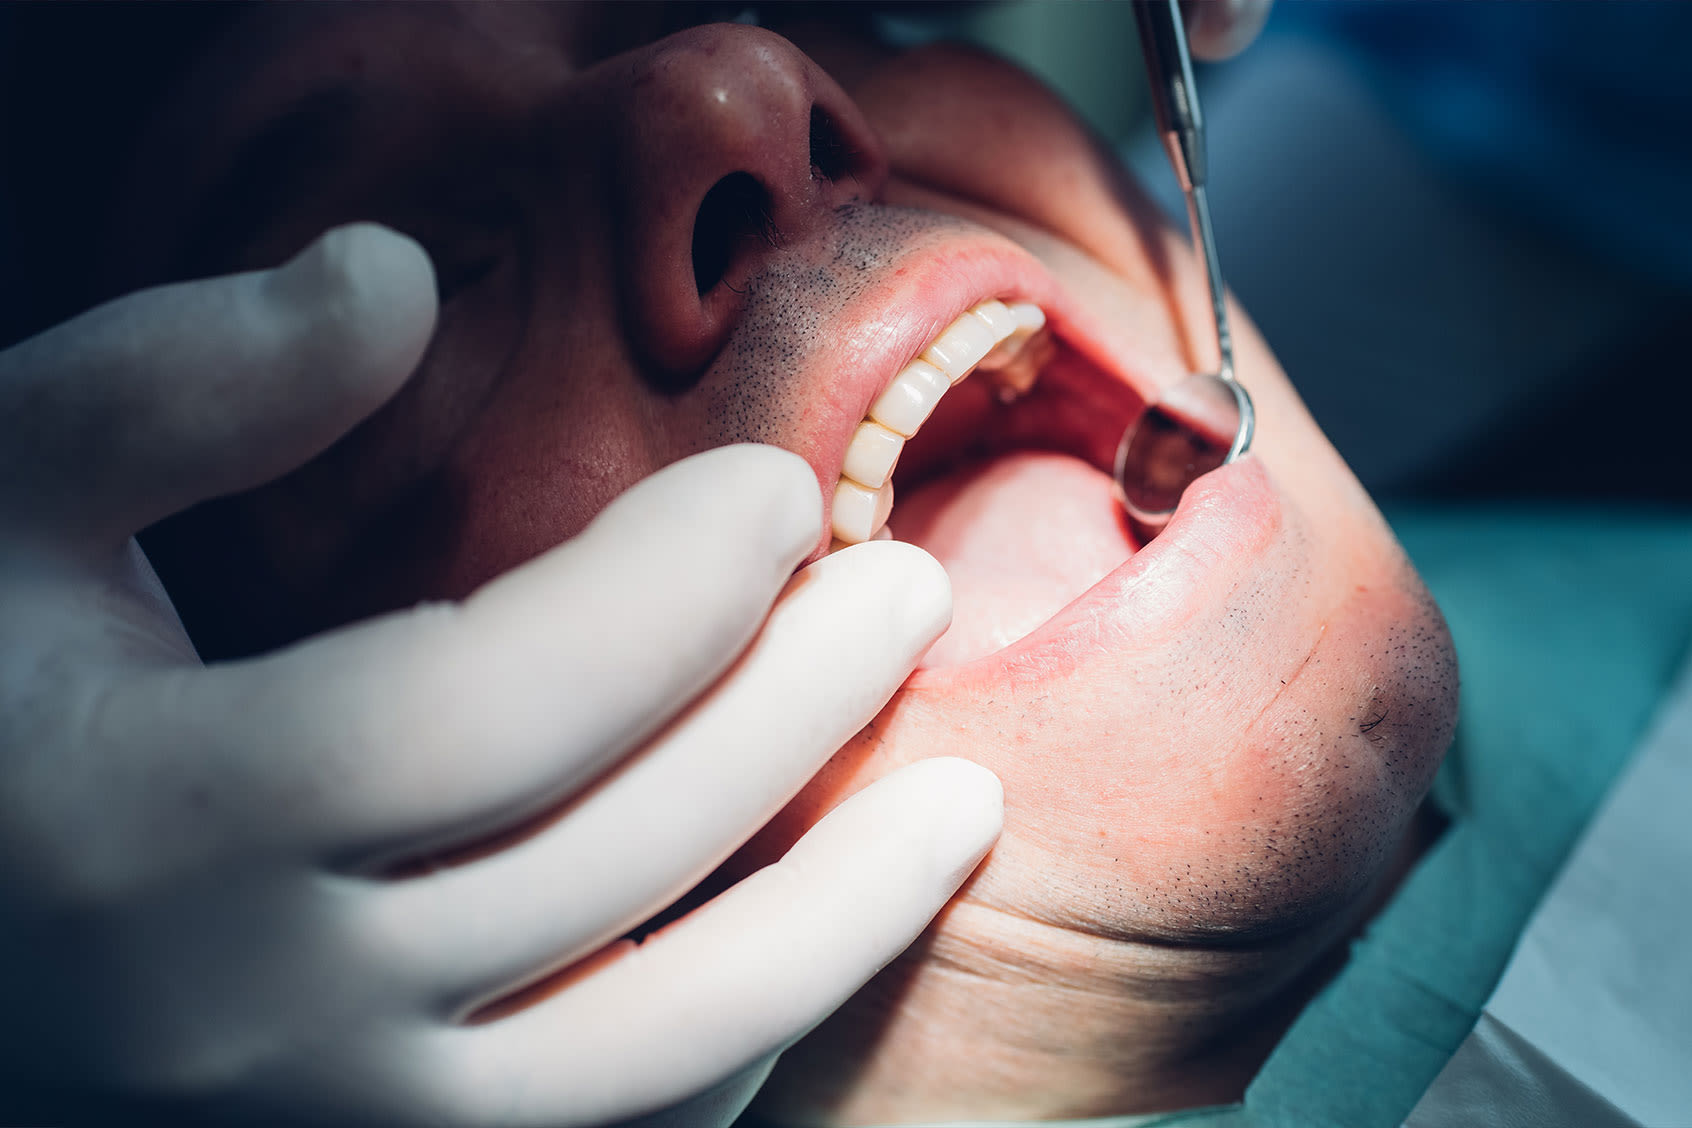 Do we need our wisdom teeth removed? Experts say this common procedure may be unnecessary